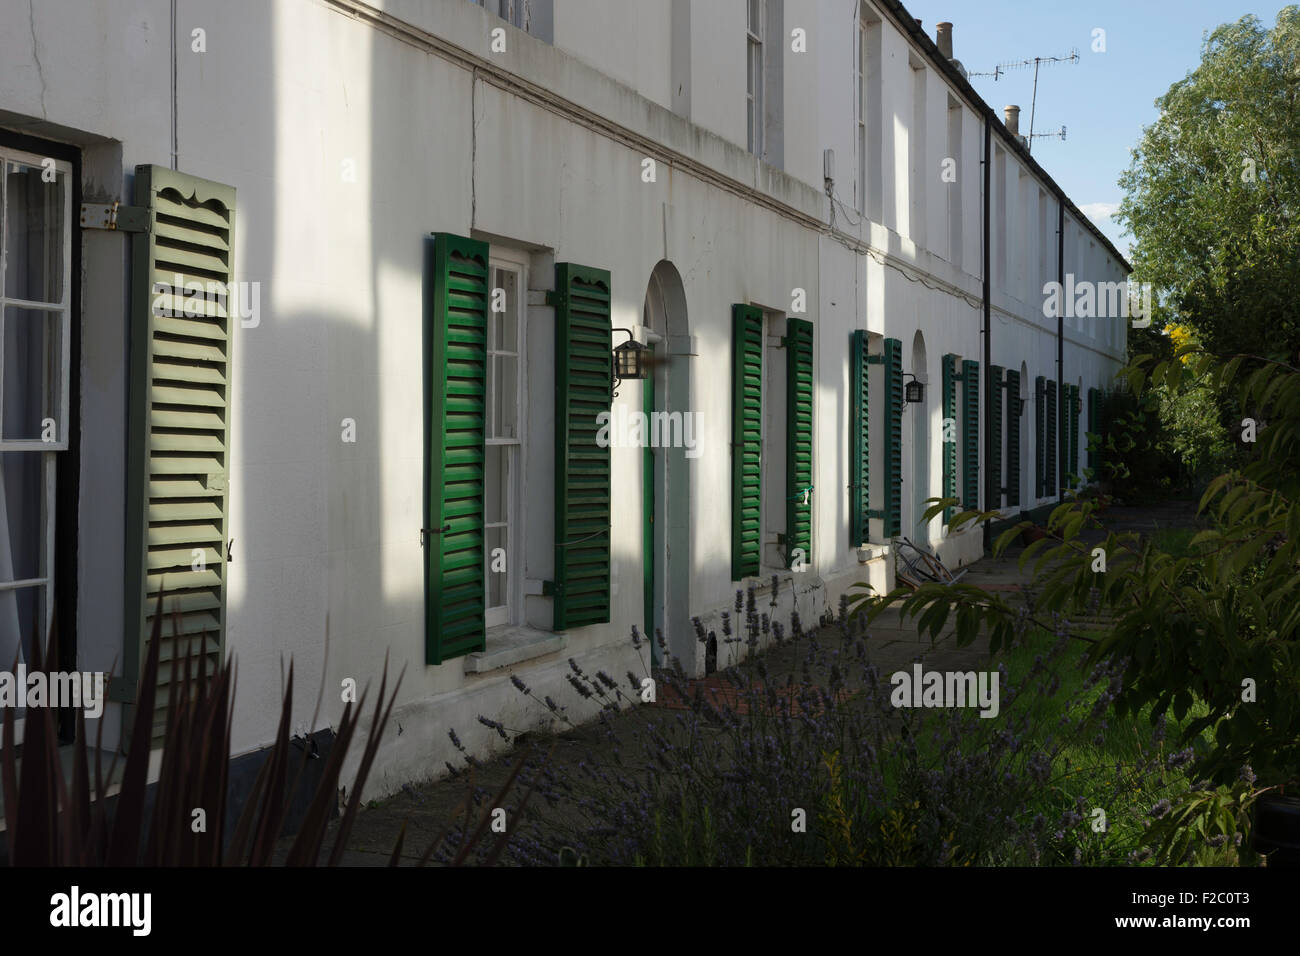 Green shutters in light and shade Stock Photo